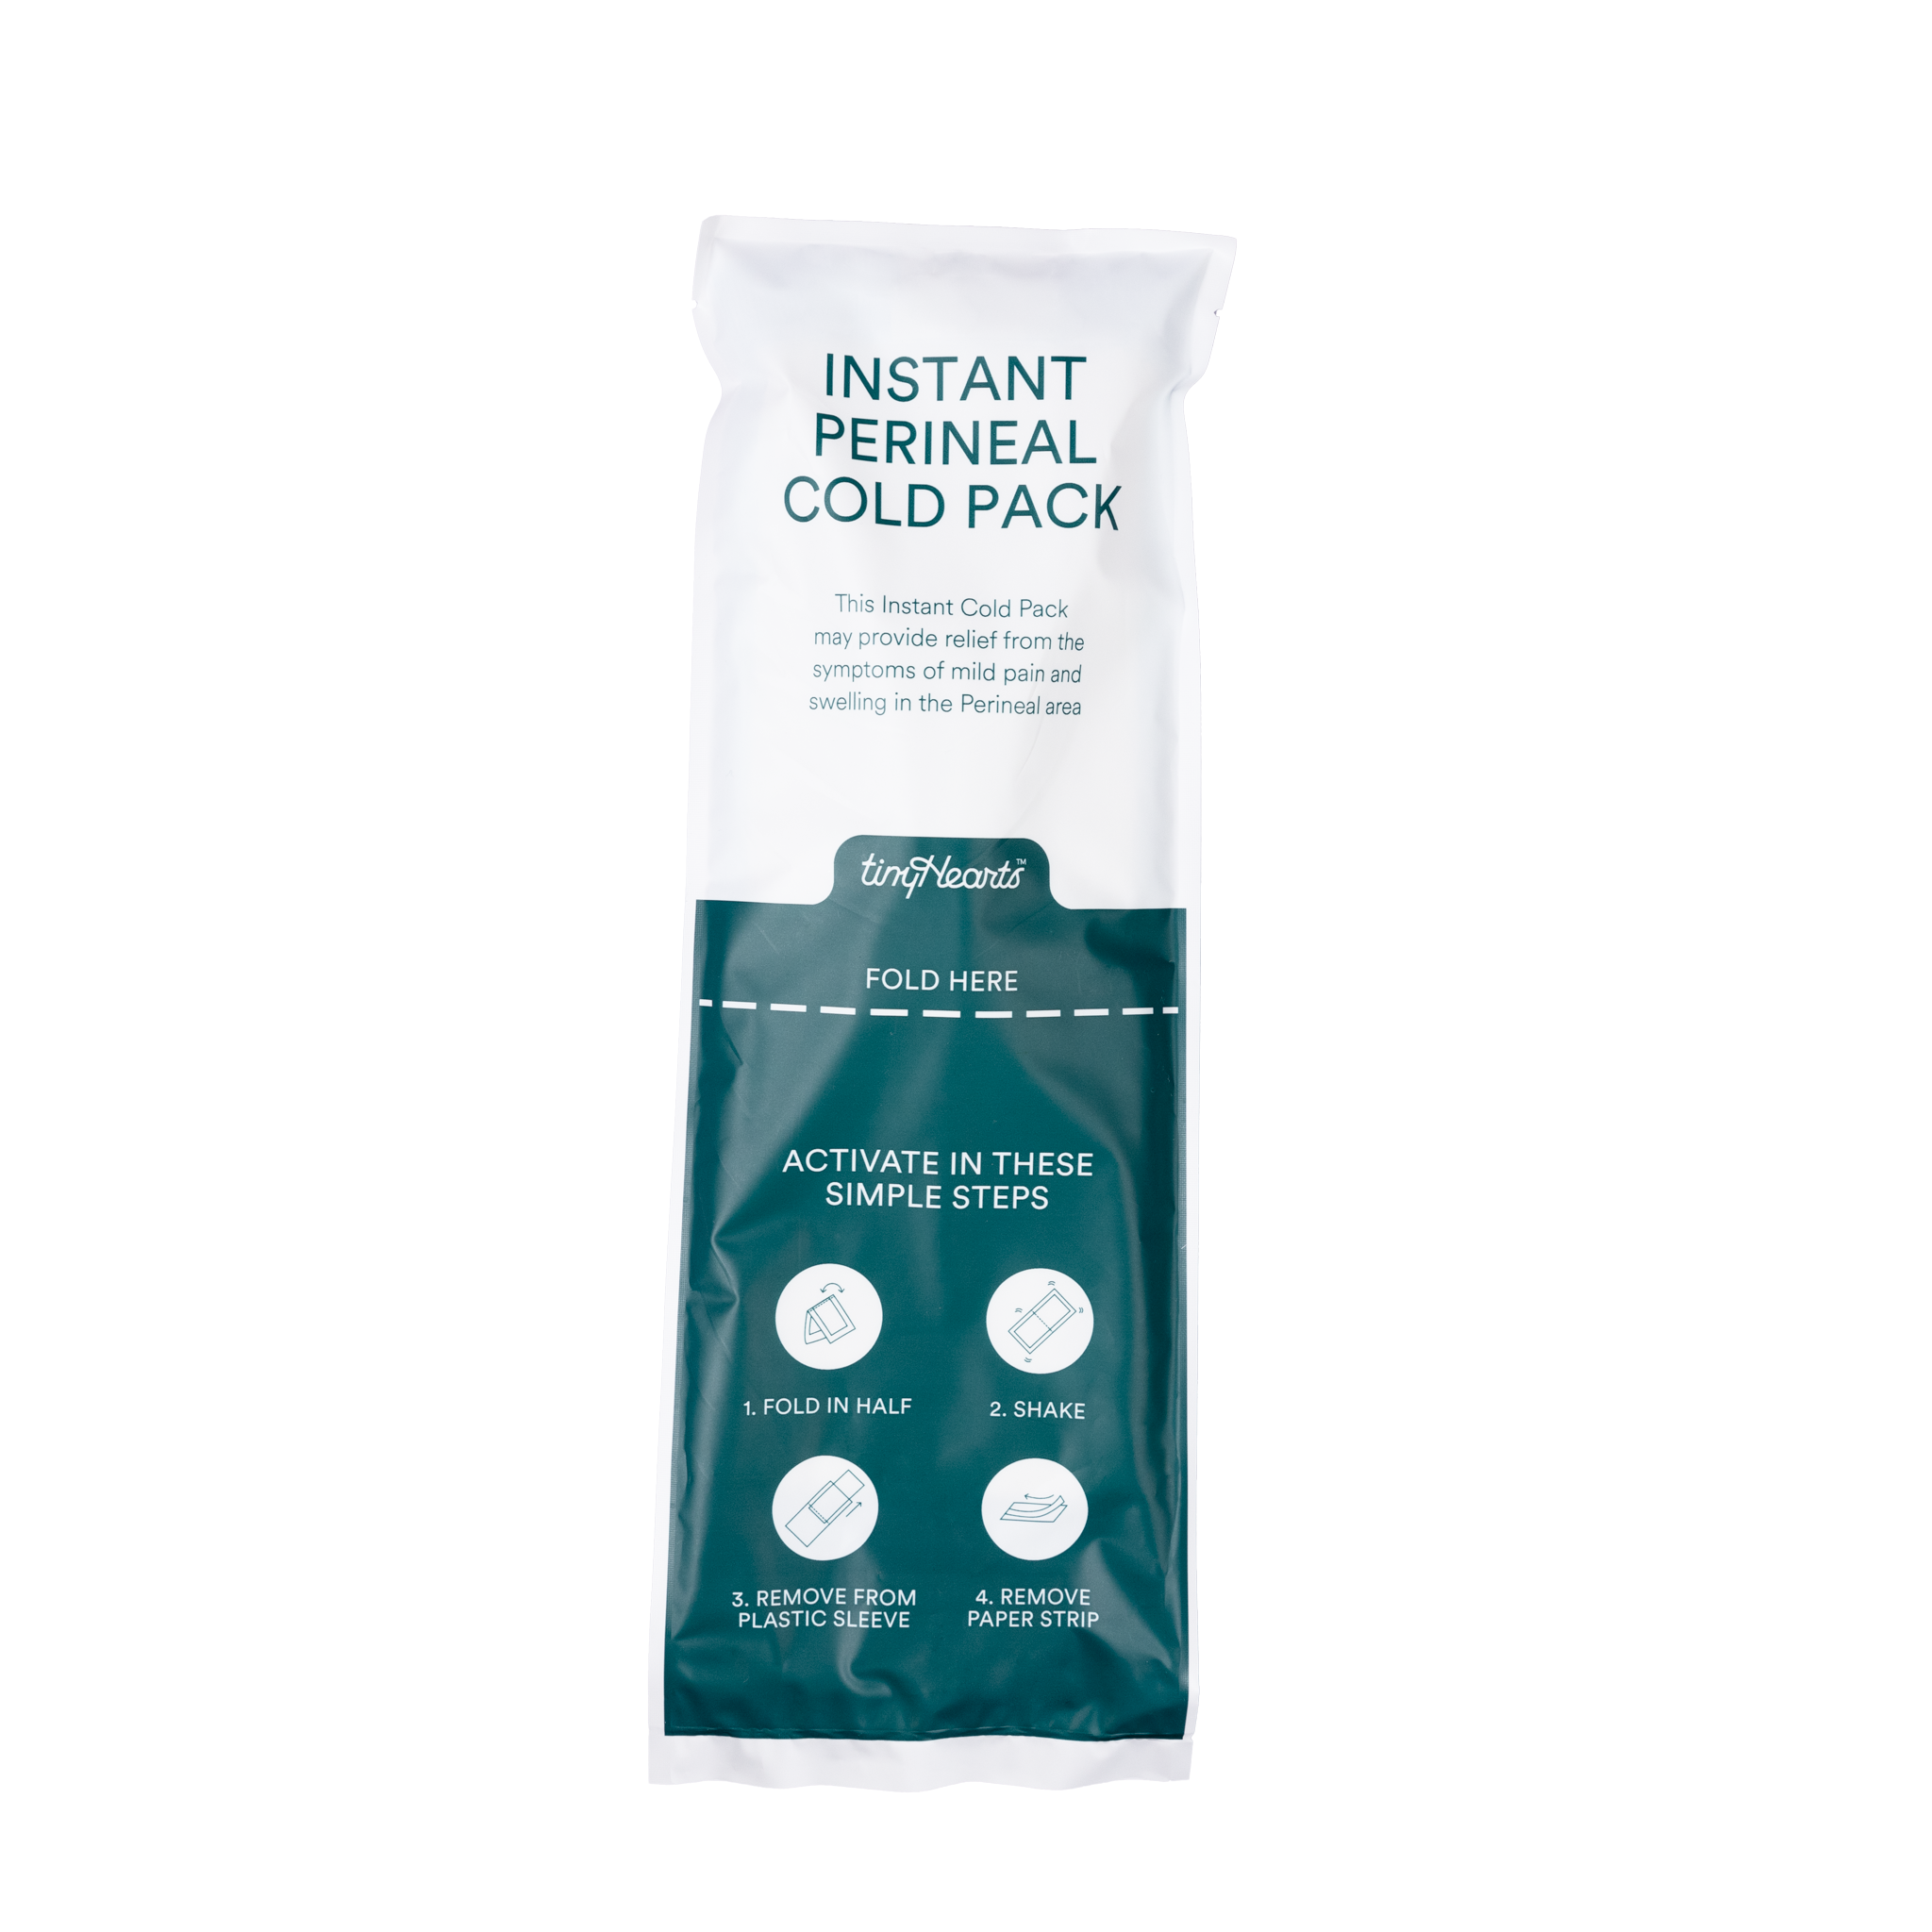 Perineal Ice Pack